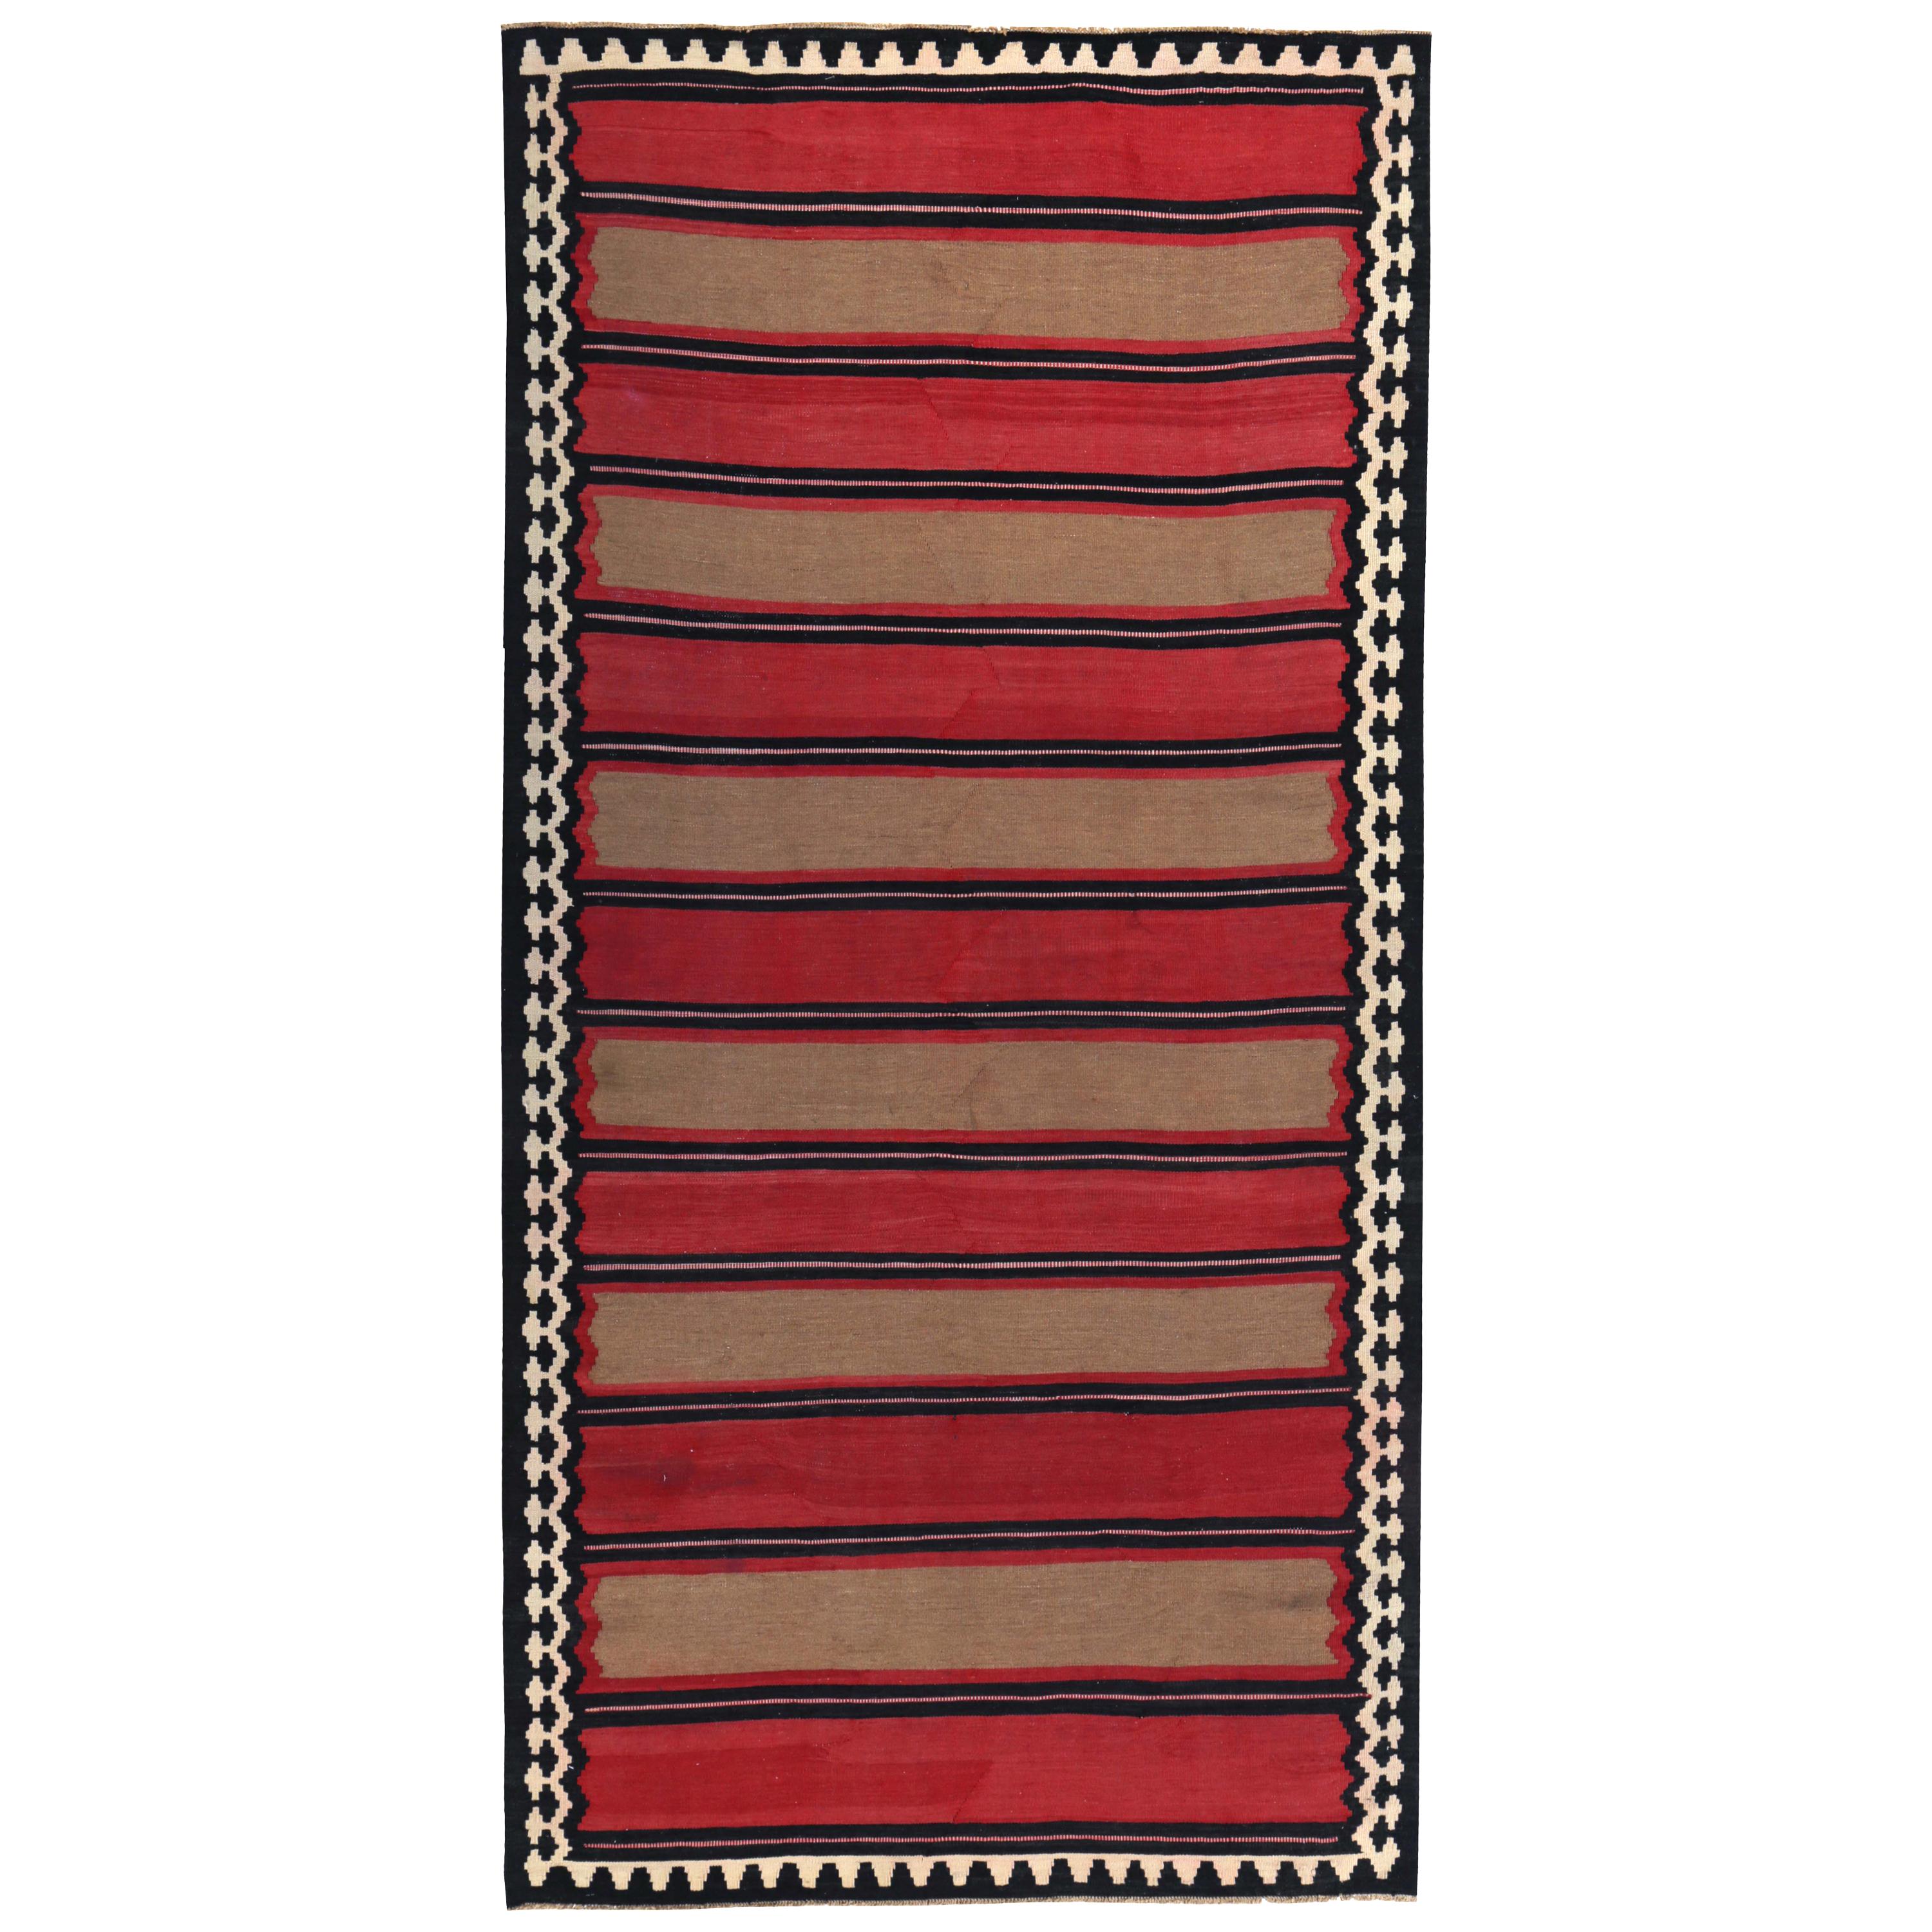 Modern Turkish Kilim Rug with Red and Brown and Block Stripes in a Black Field